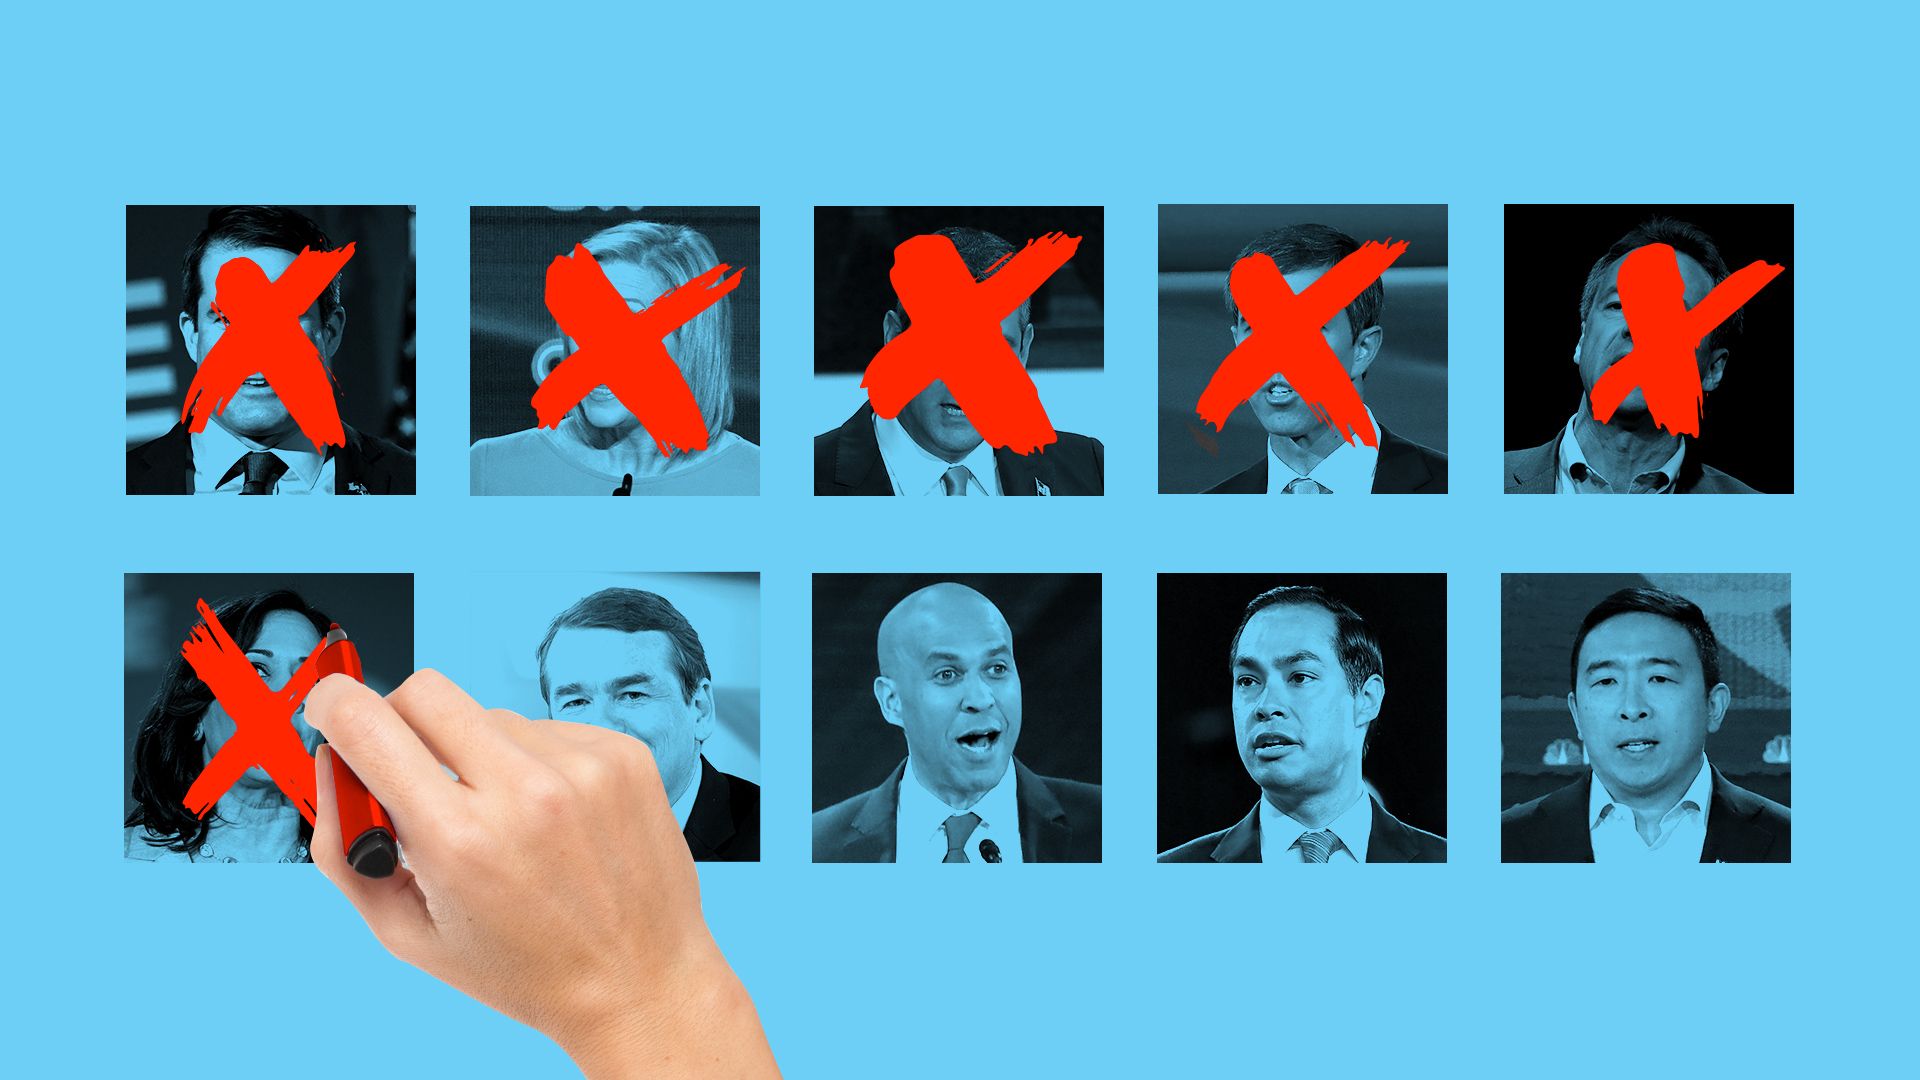 Illustration of the Generation X presidential candidates being crossed out with giant X's